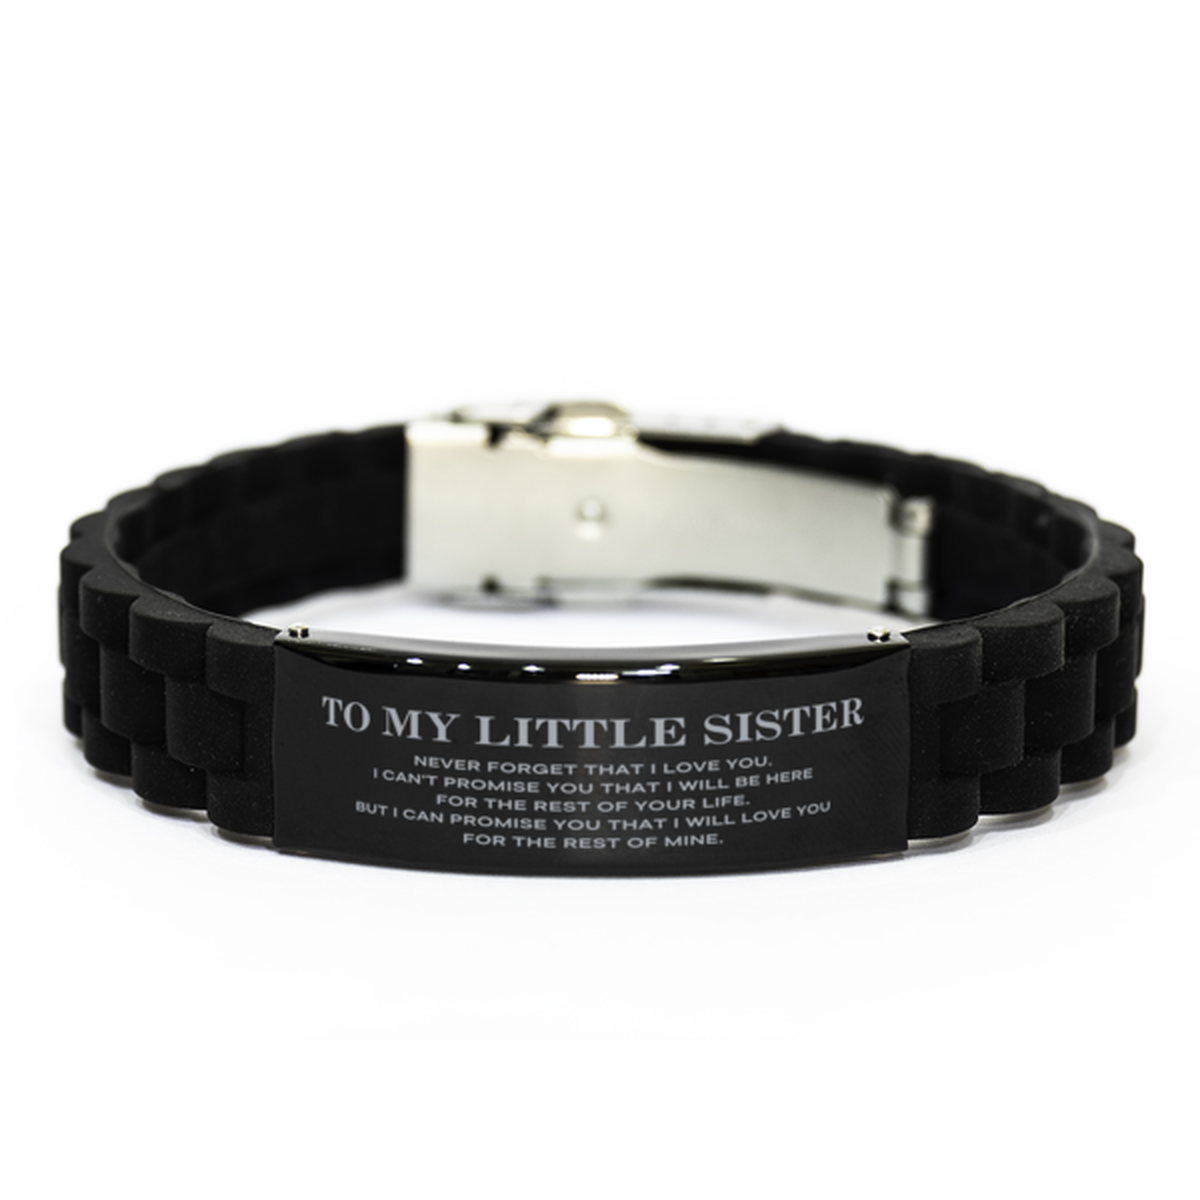 To My Little Sister Gifts, I will love you for the rest of mine, Love Little Sister Bracelet, Birthday Christmas Unique Black Glidelock Clasp Bracelet For Little Sister